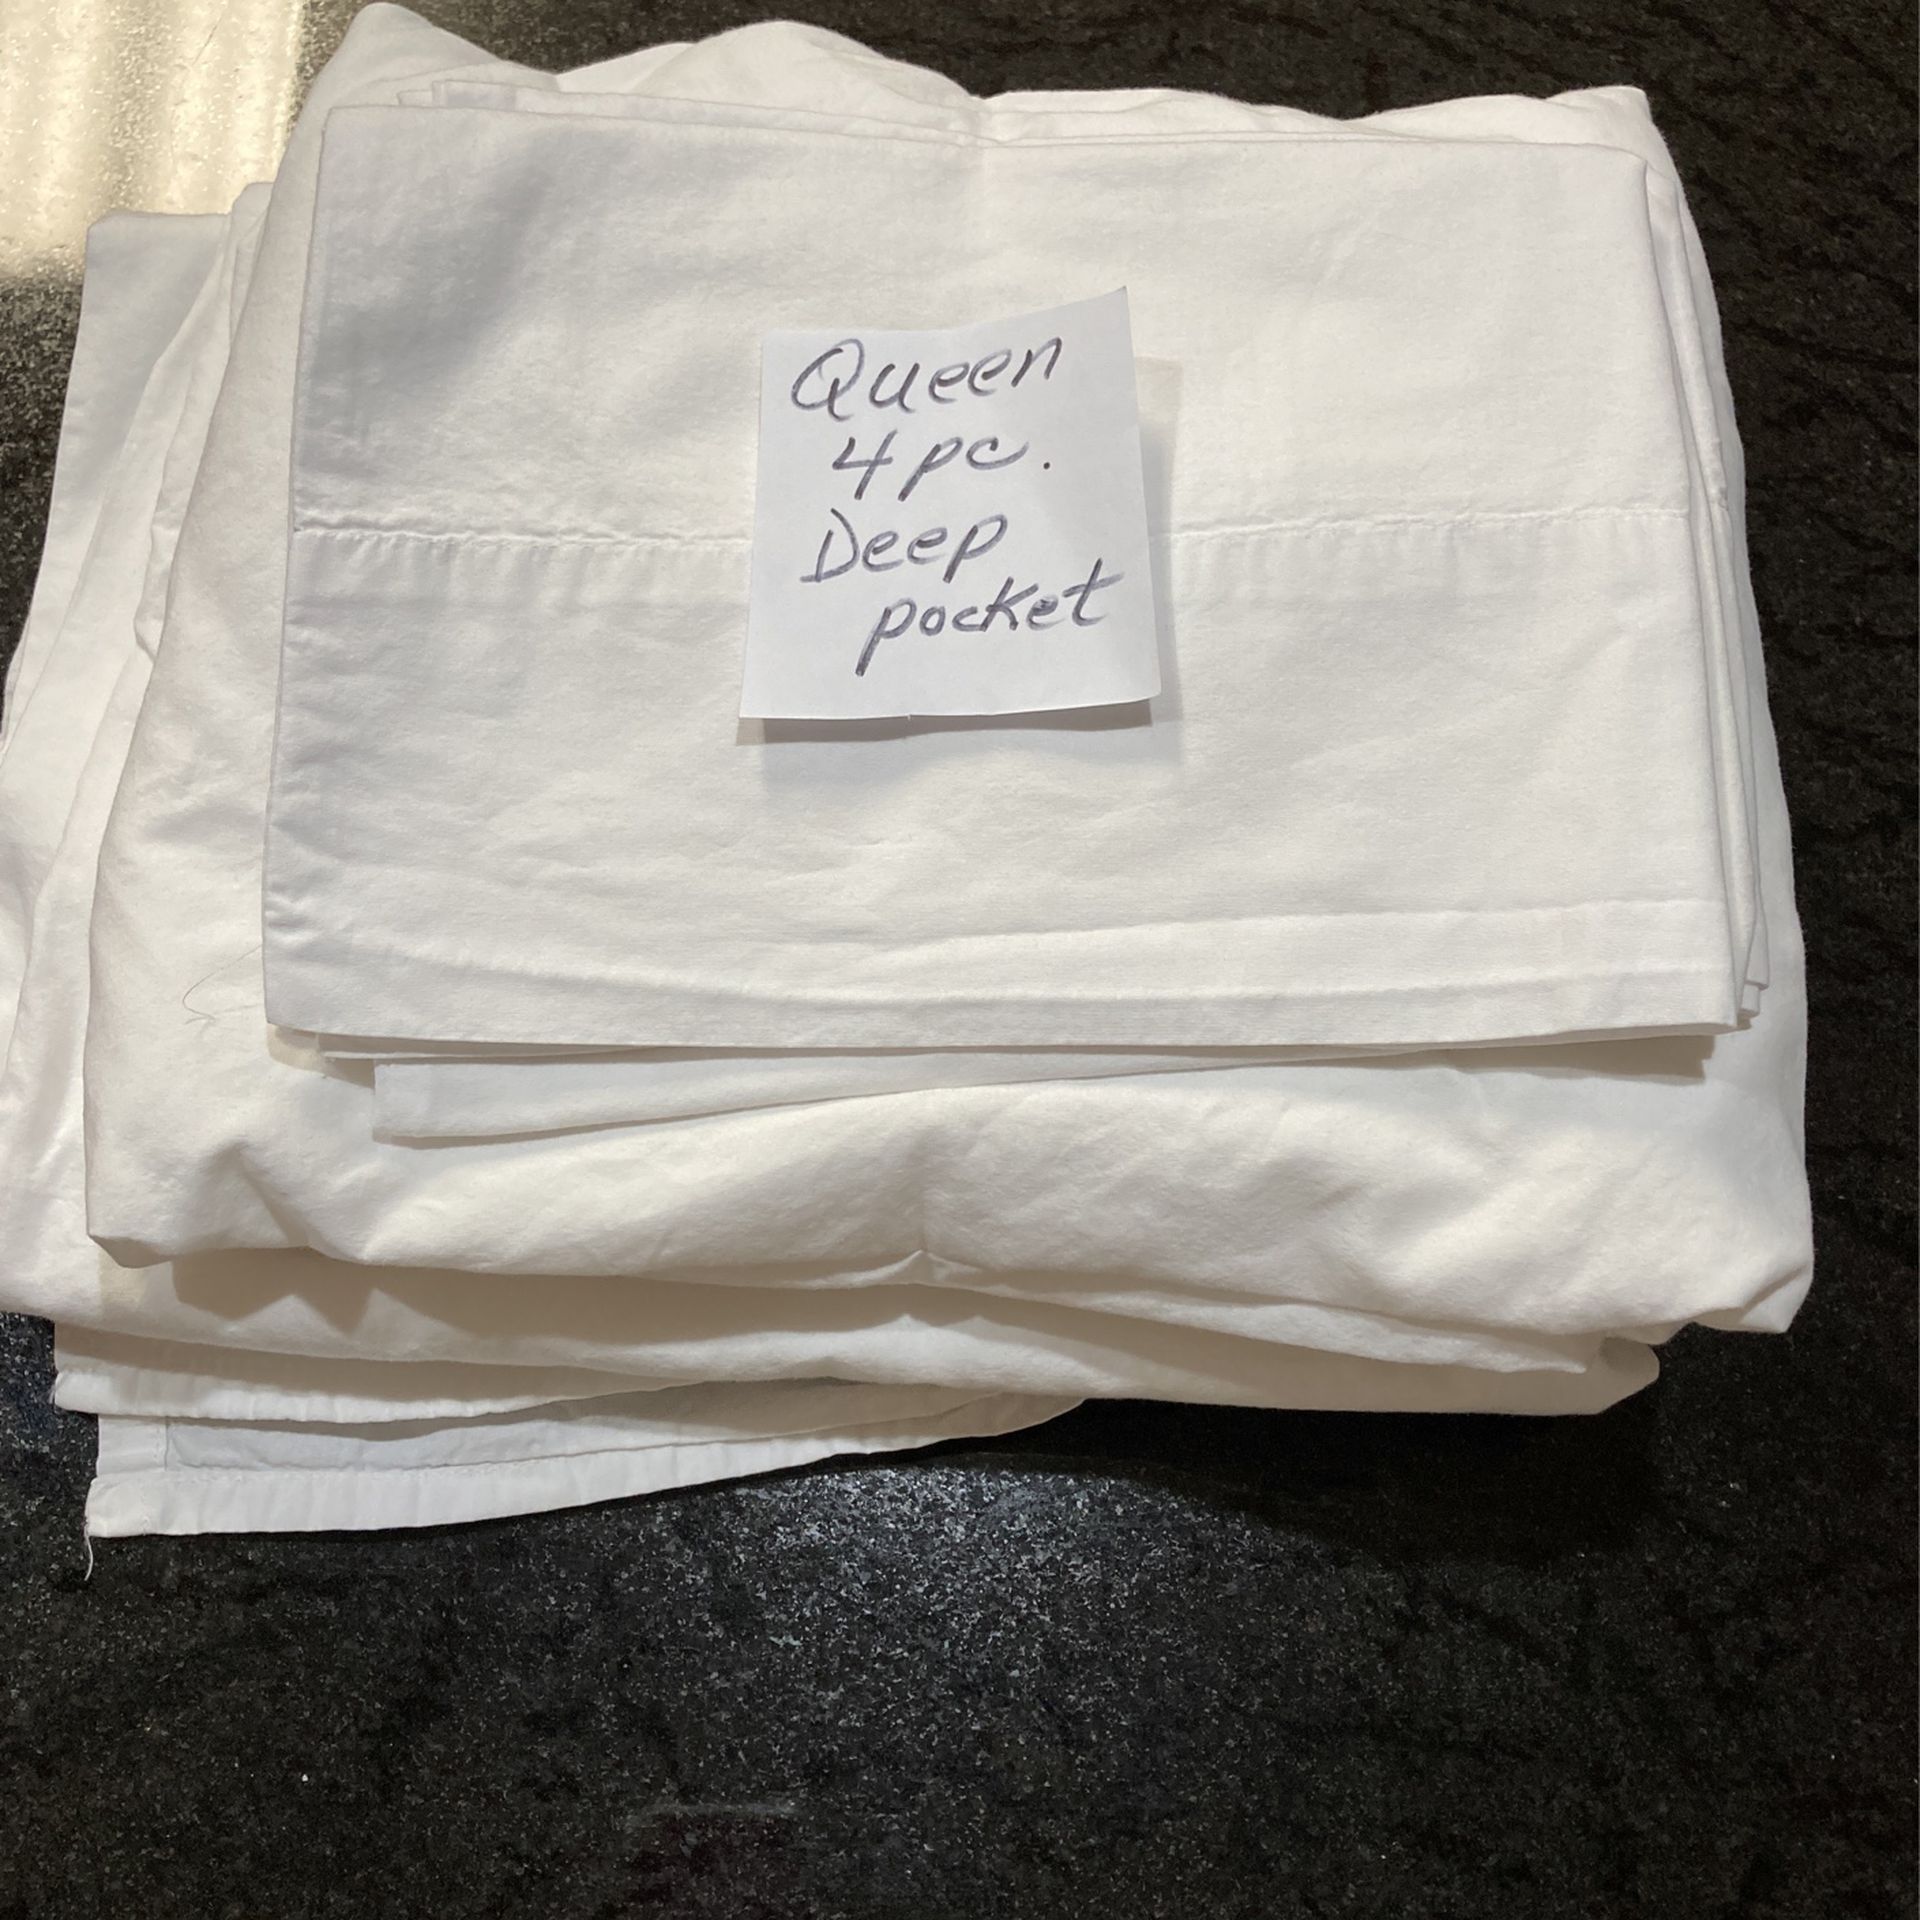 Two sets of queen size deep pocket sheets. 